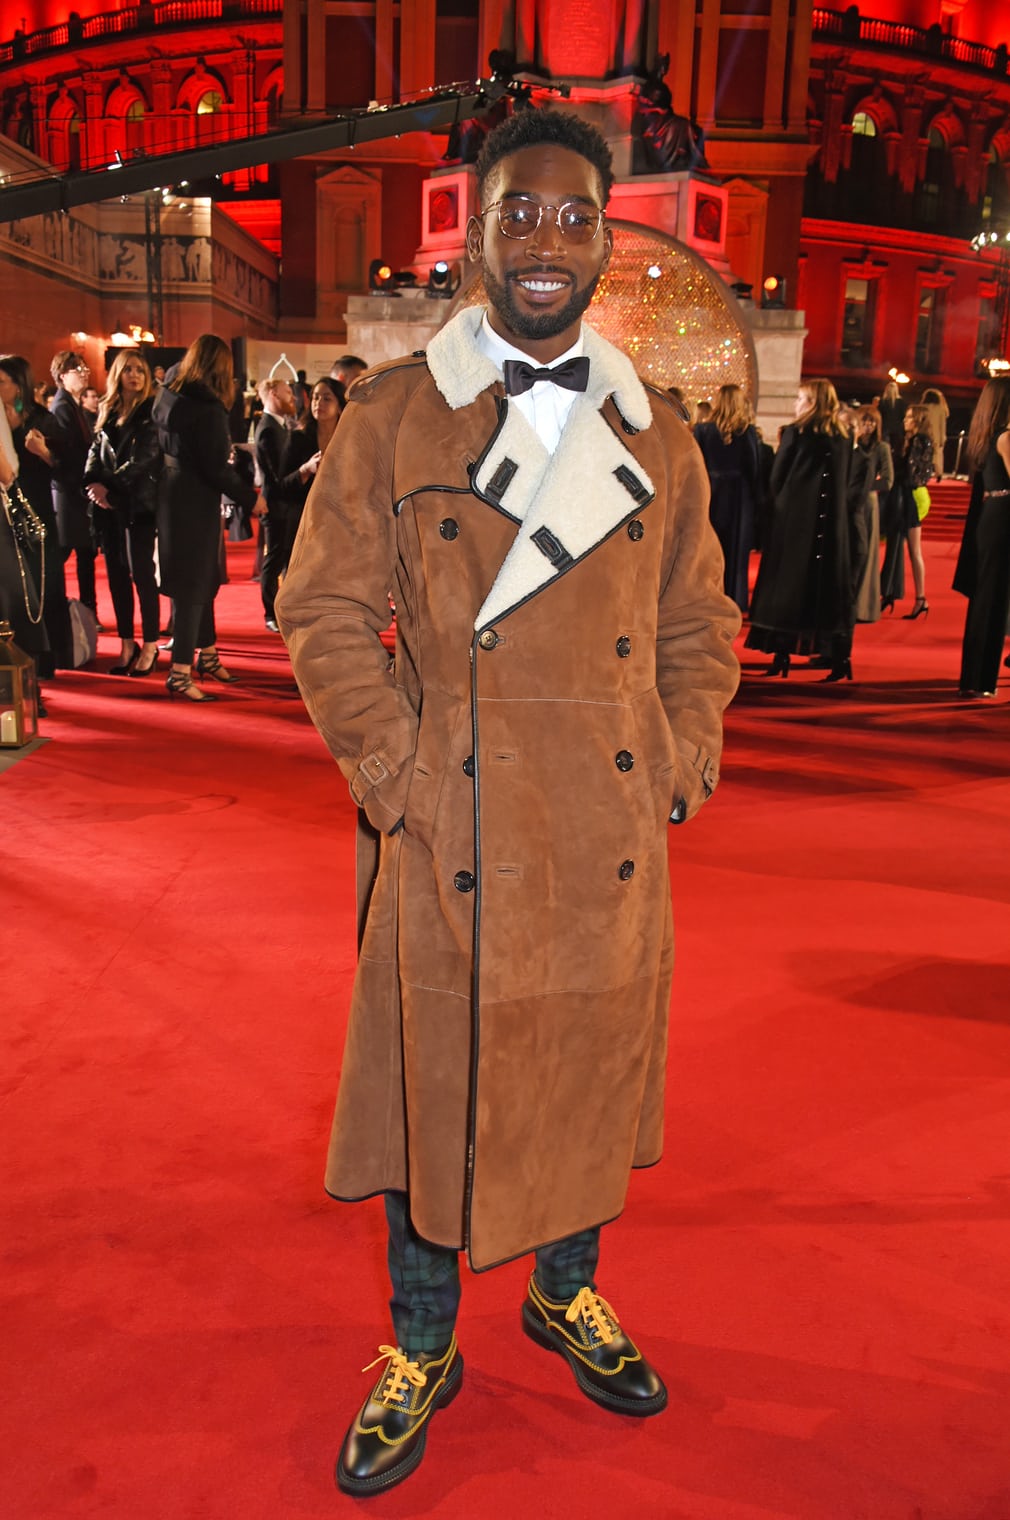 Tinie Tempah in Burberry. Photograph by David M Benett for Getty Images